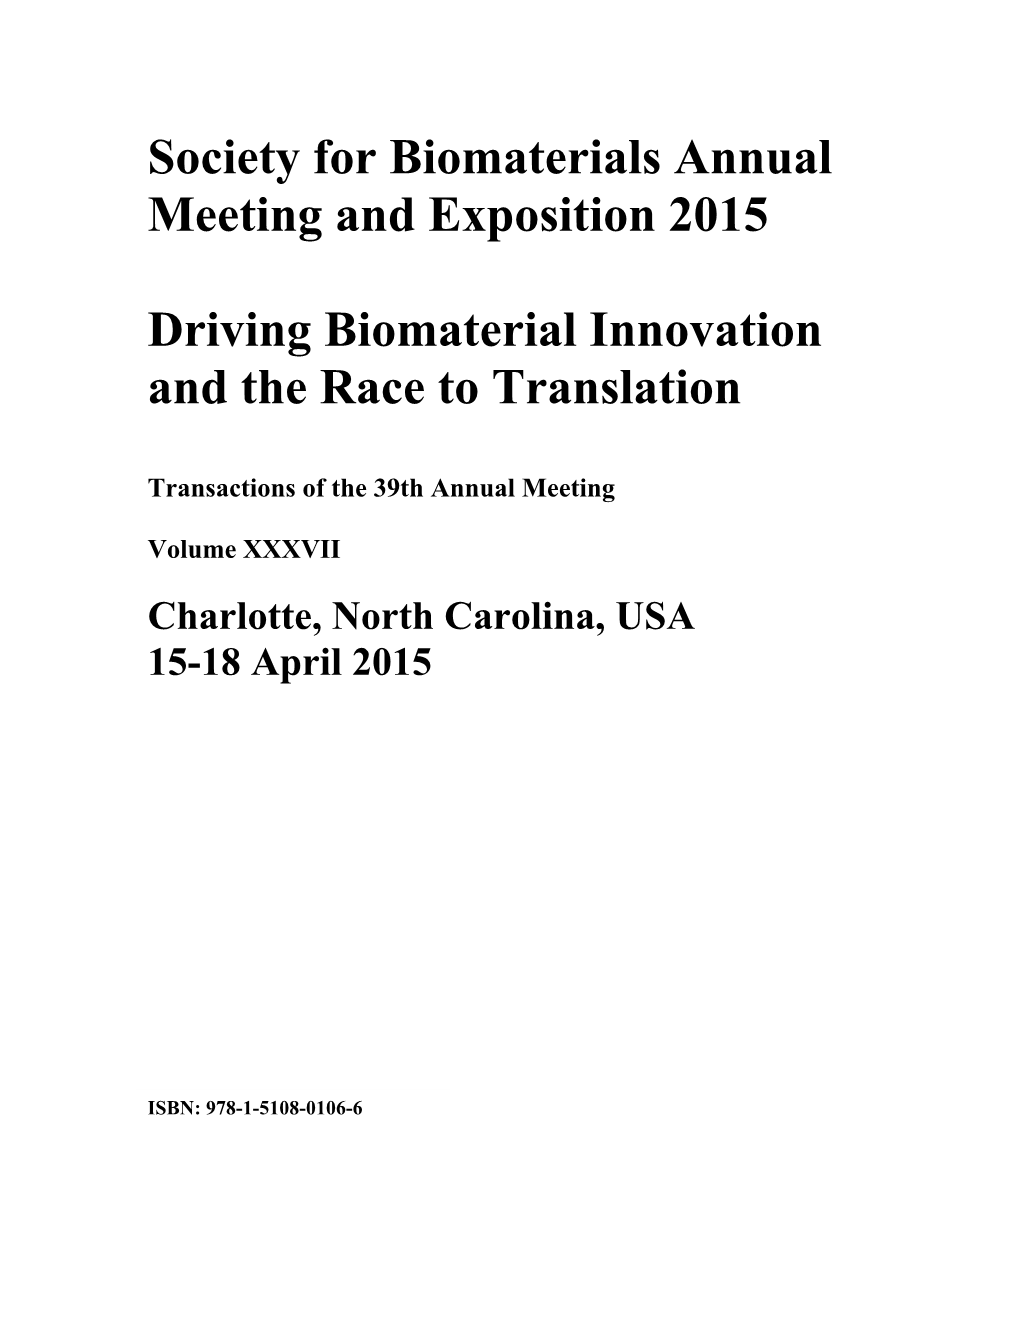 Society for Biomaterials Annual Meeting and Exposition 2015